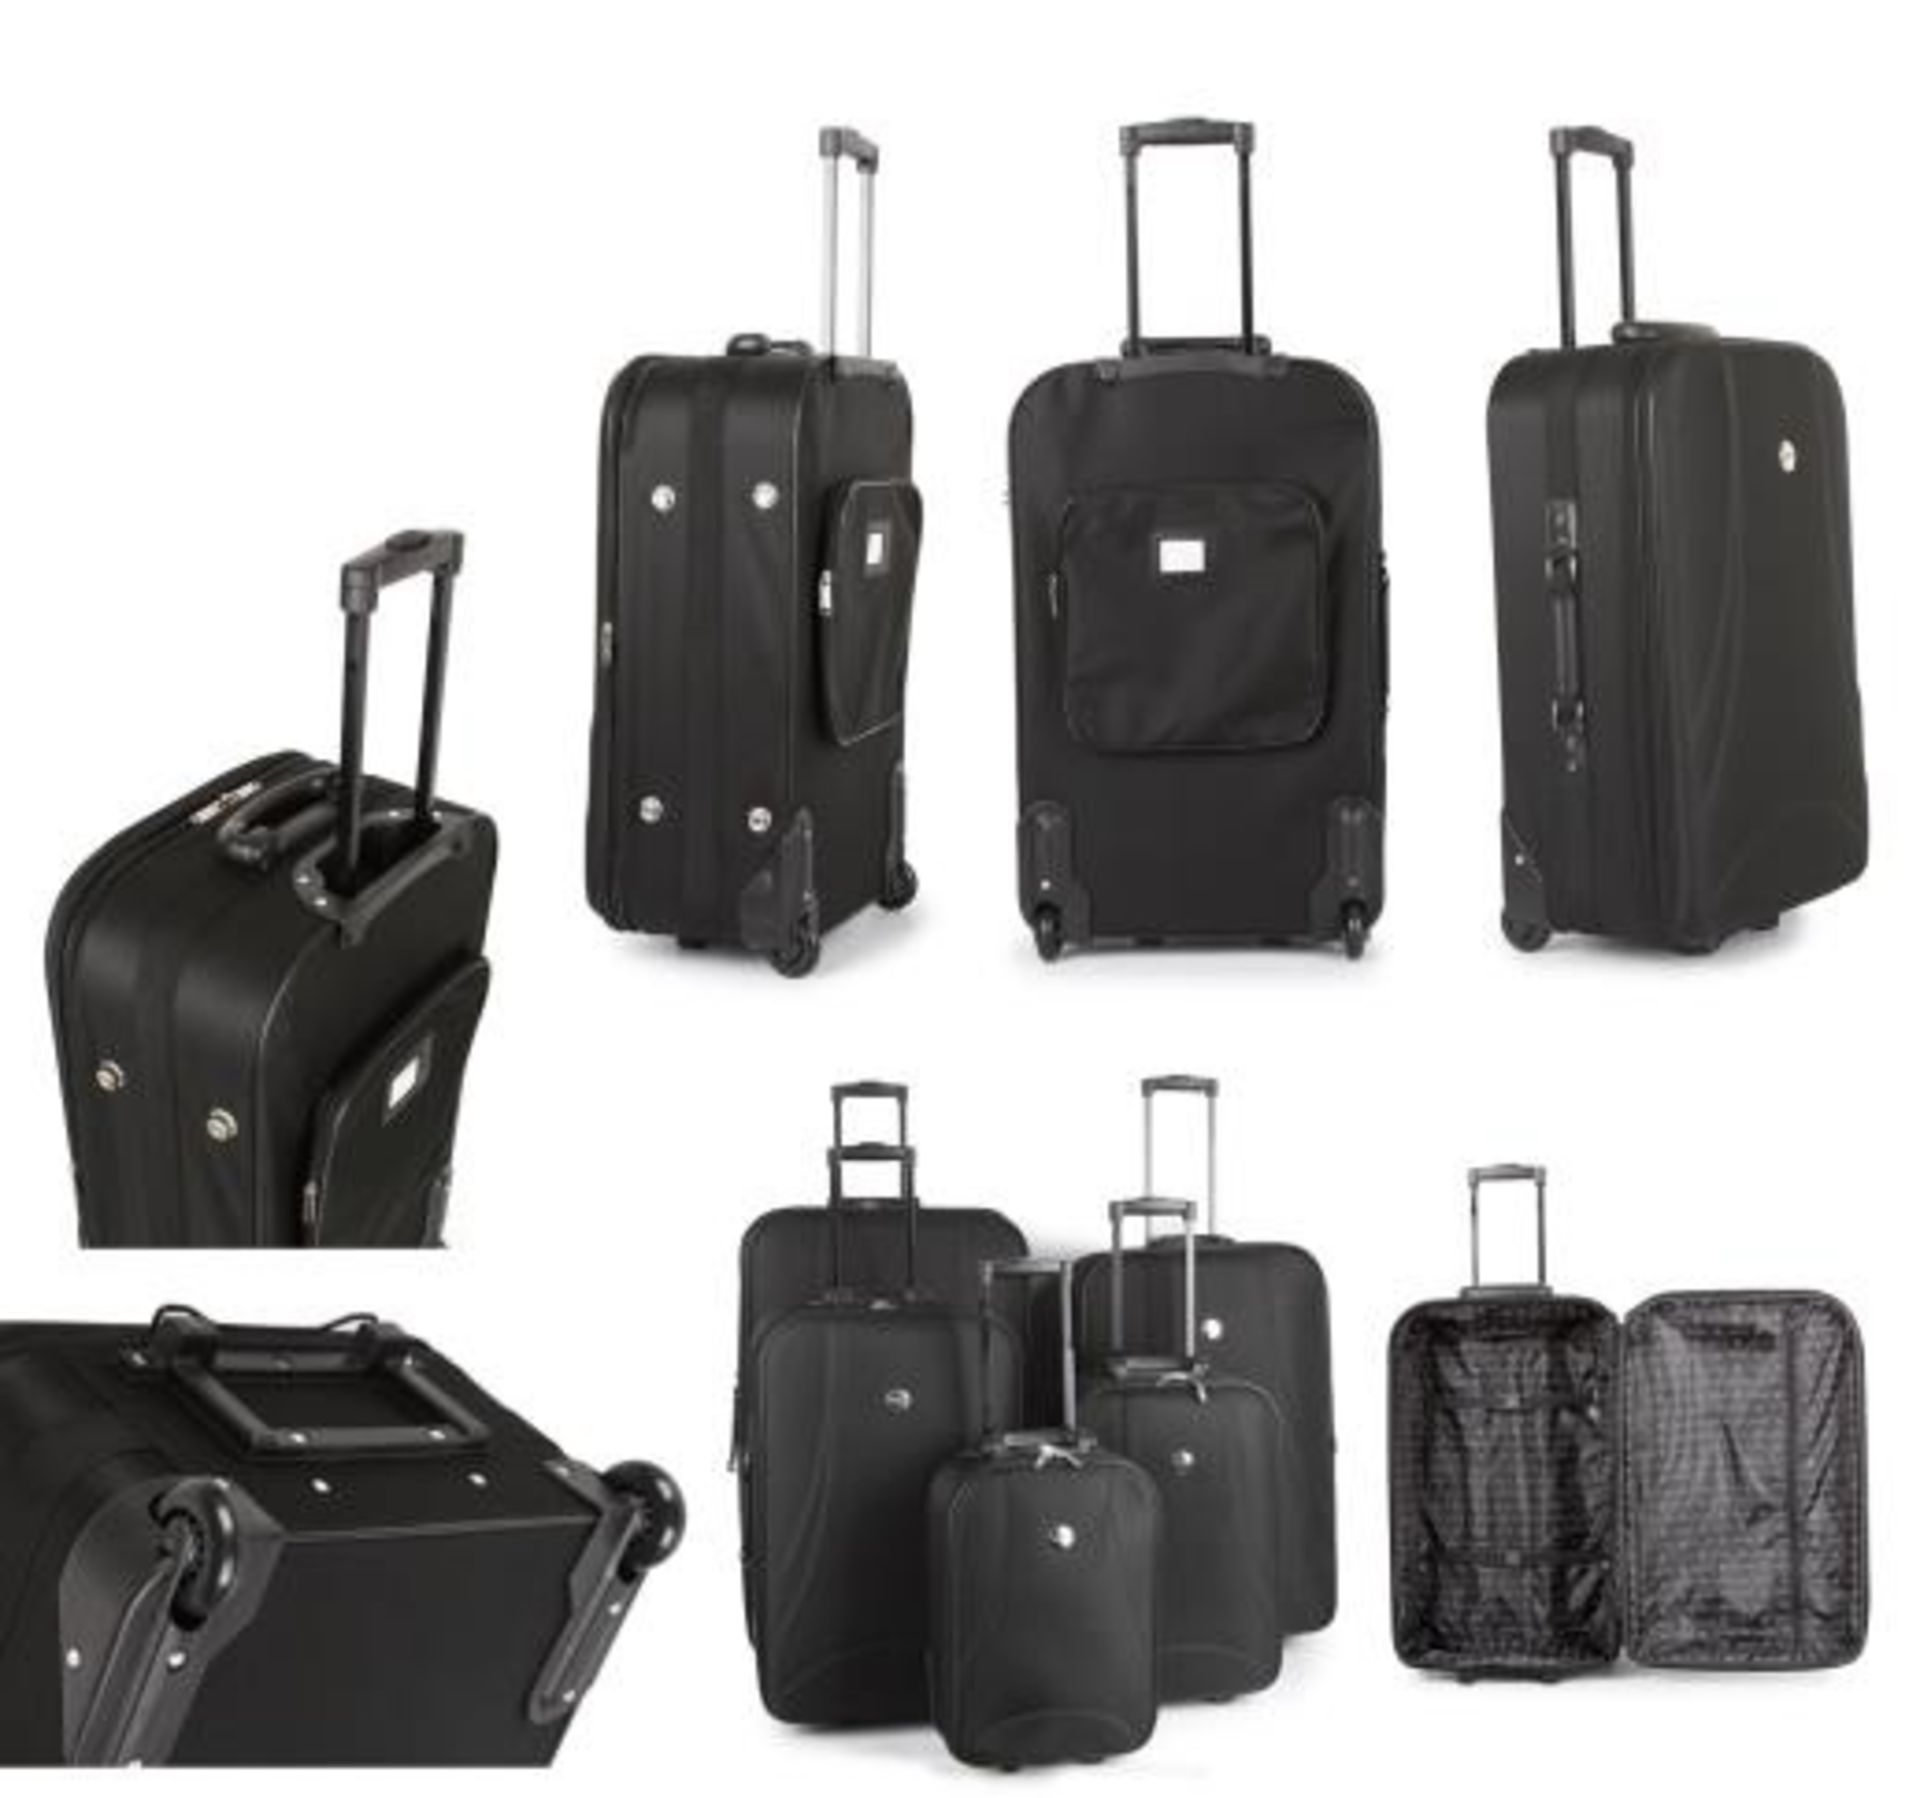 V Brand New 5 Piece Trolley Case Set Comprising 31-28-25 and Cabin Sized 20 & 17 Inch Cases. All Are